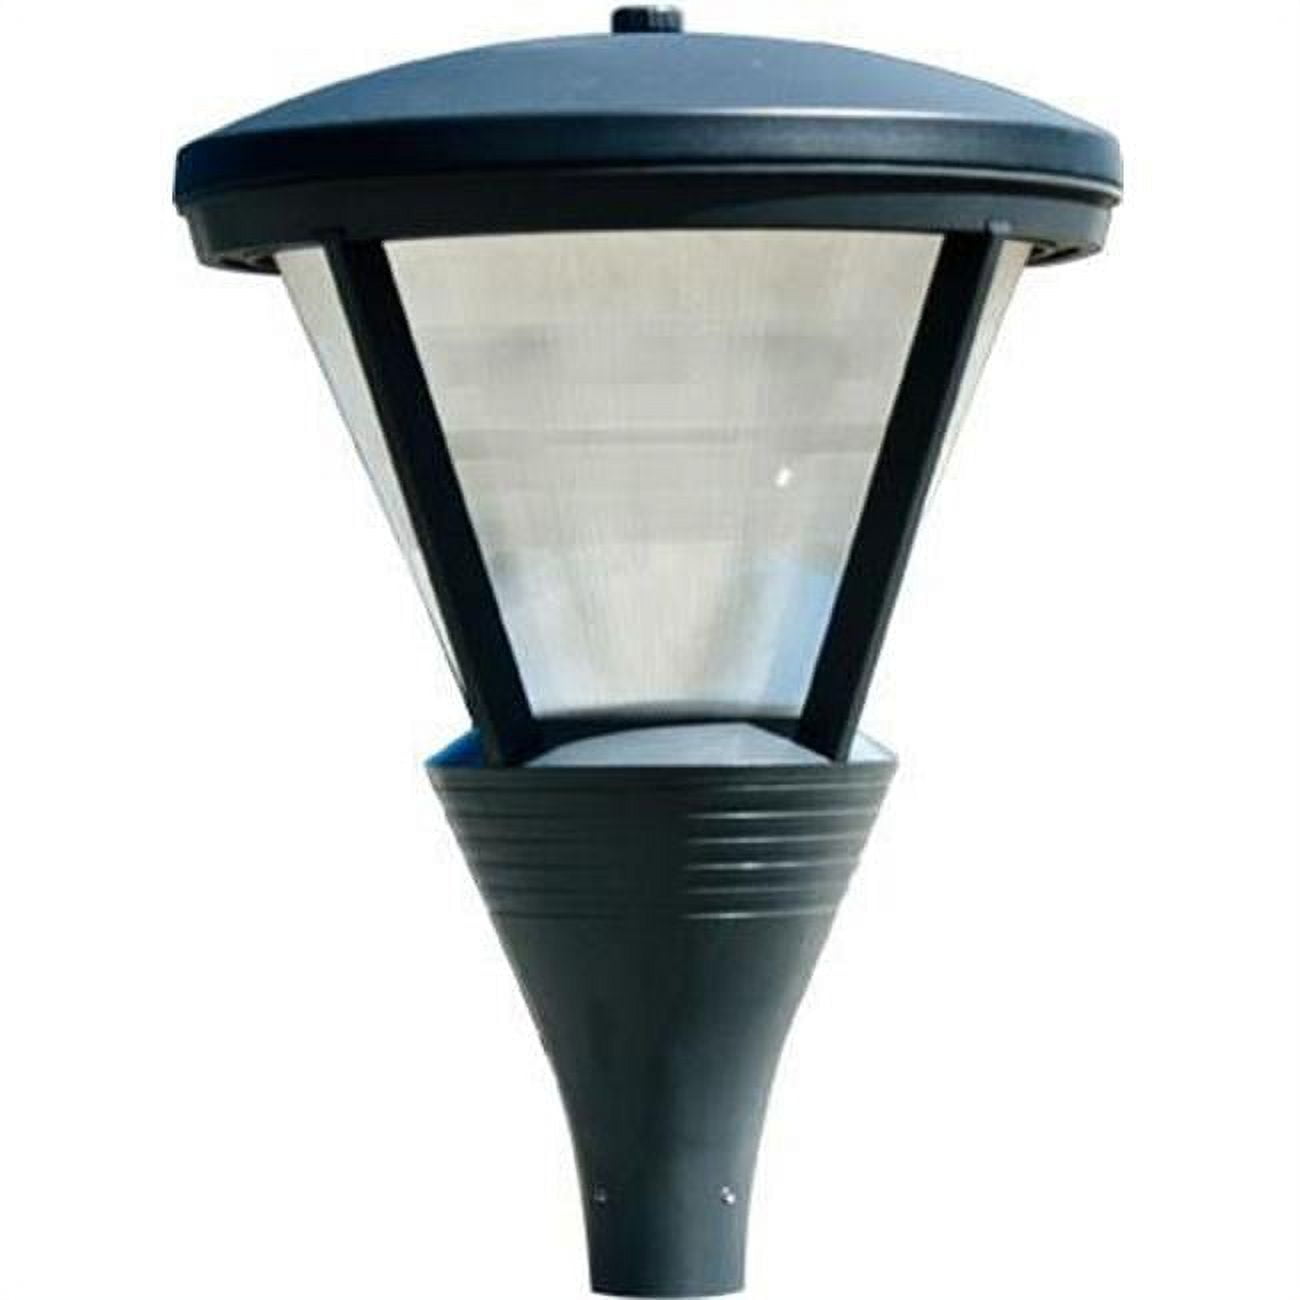 Picture of Dabmar Lighting GM586-B-MT Powder Coated Cast Aluminum Architectural Post Top Light Fixture, Black - 34.50 x 25.25 x 25.25 in.